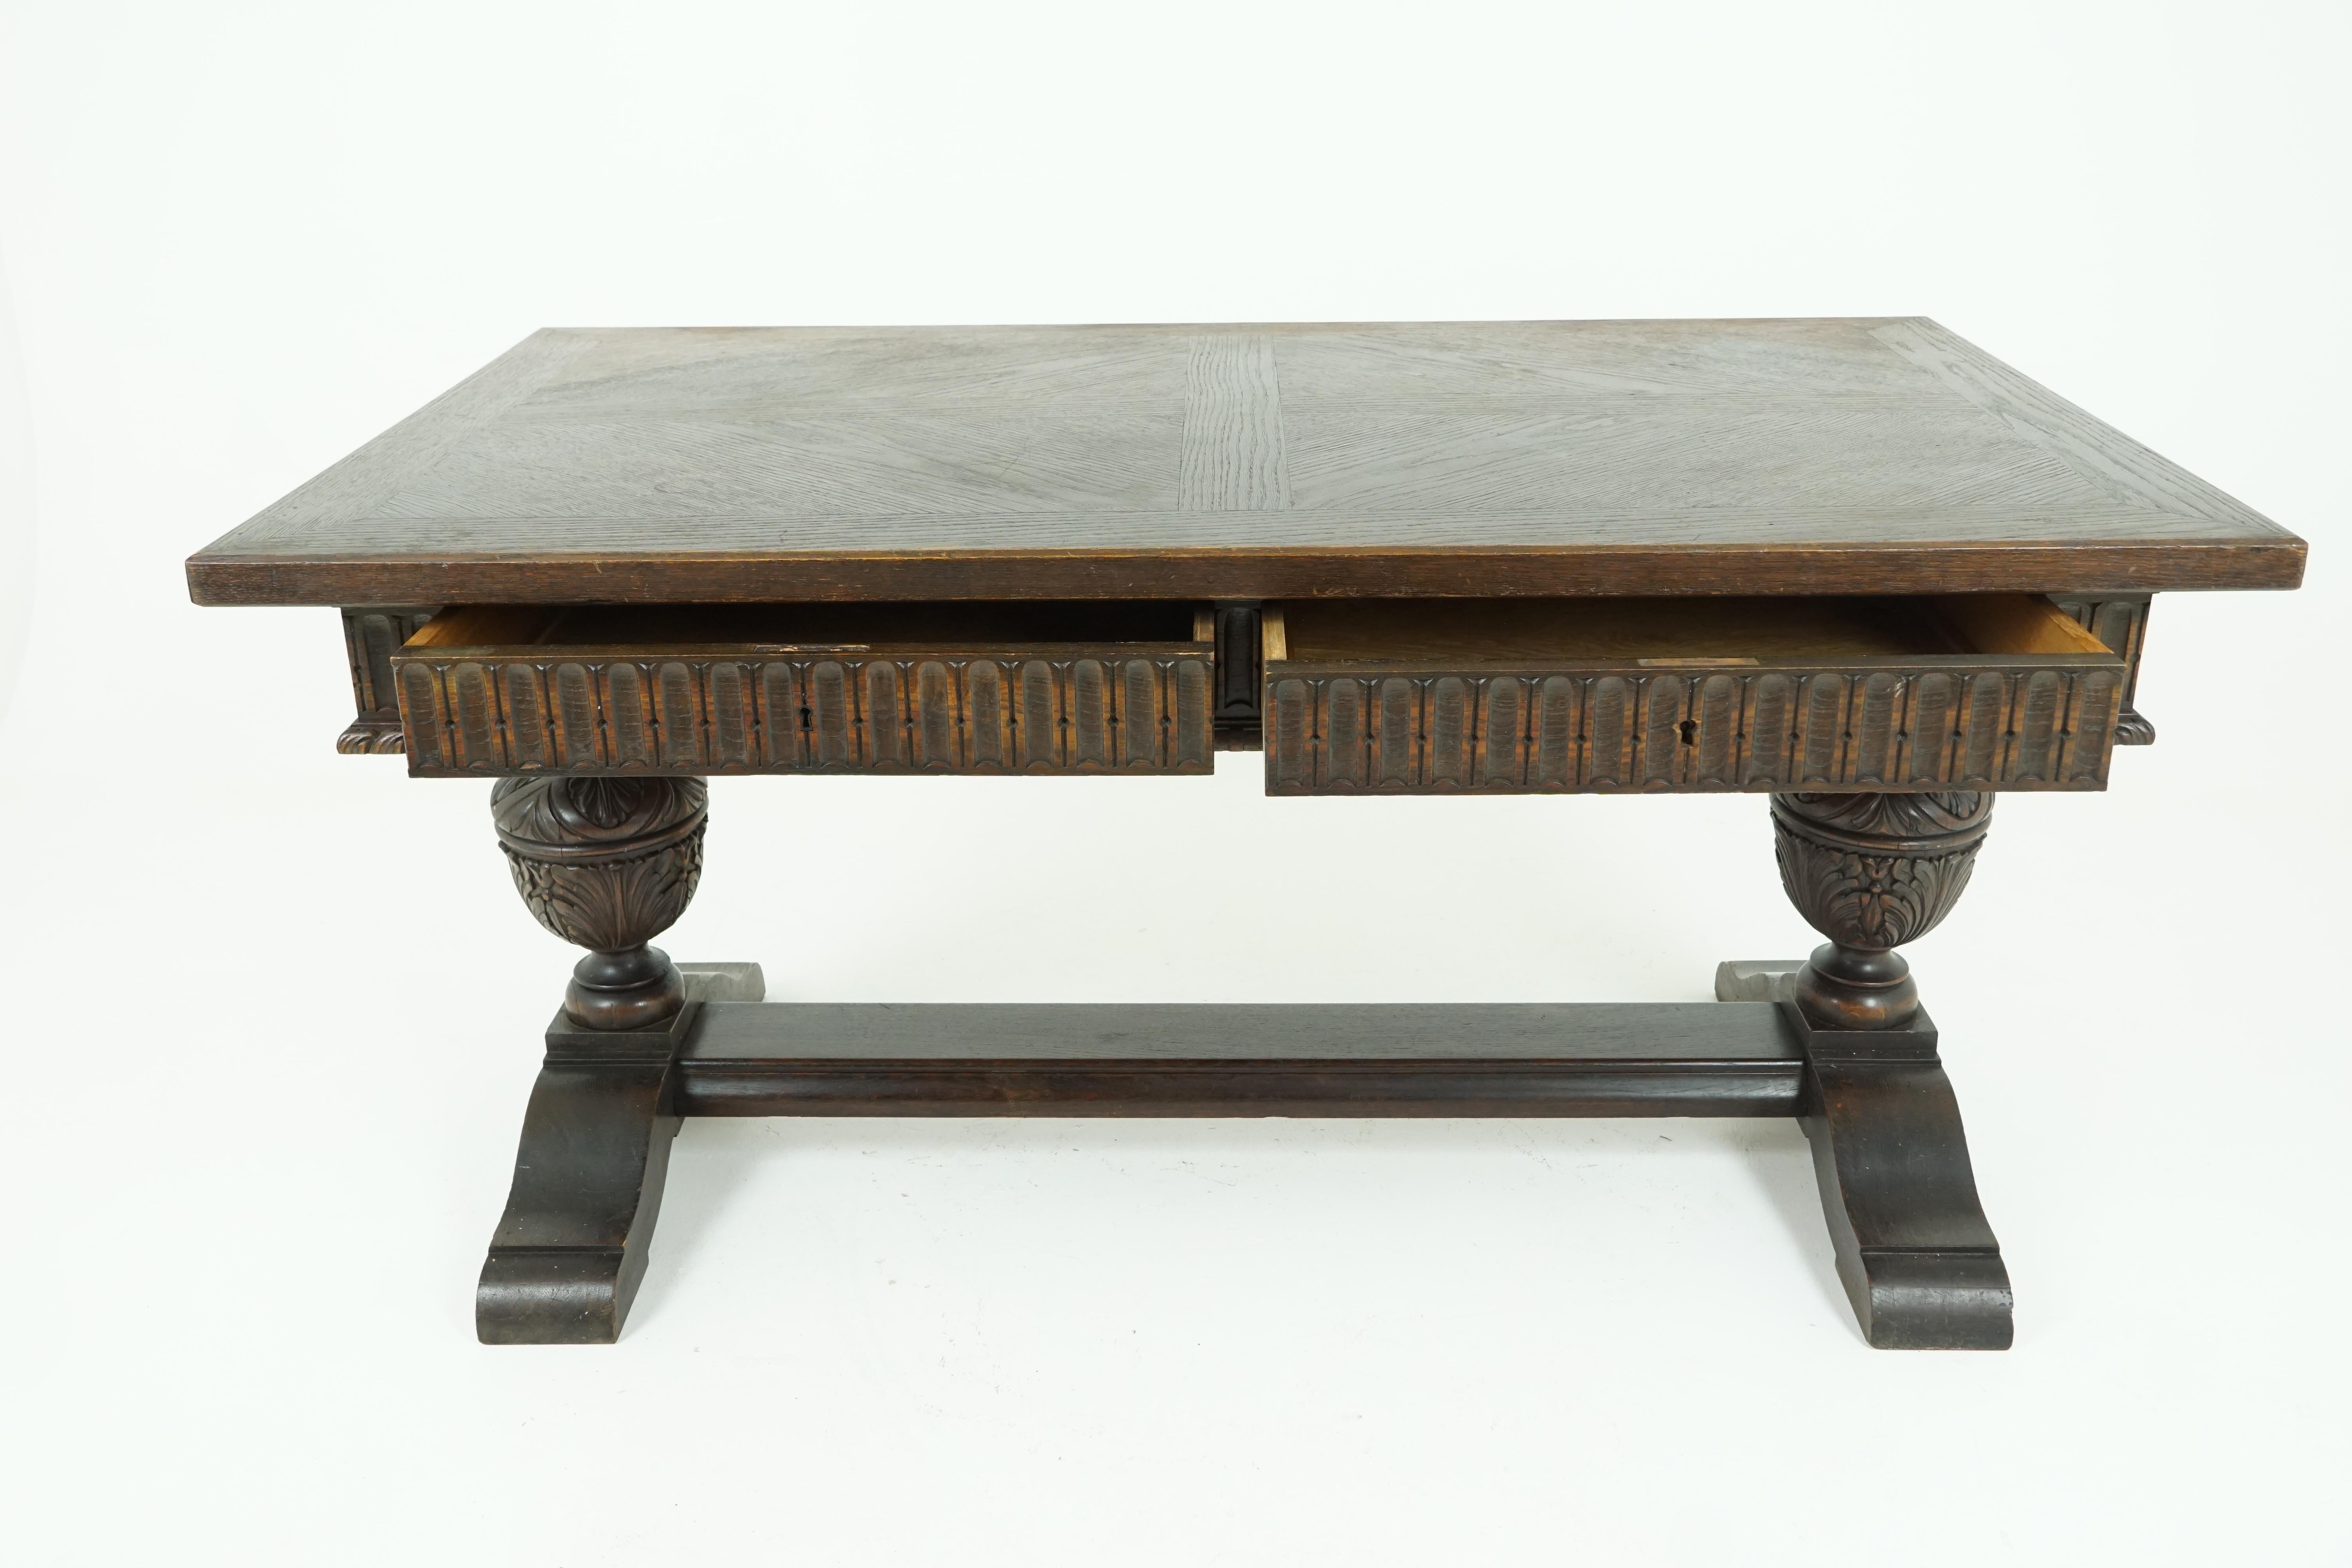 Antique furniture carved oak writing table, desk with large bulbous supports, European, 1920, B1794

European 1920
Solid oak and veneers
Original finish
Rectangular veneered top
Carved frieze below with
Two dovetailed drawers
Sitting on top of two